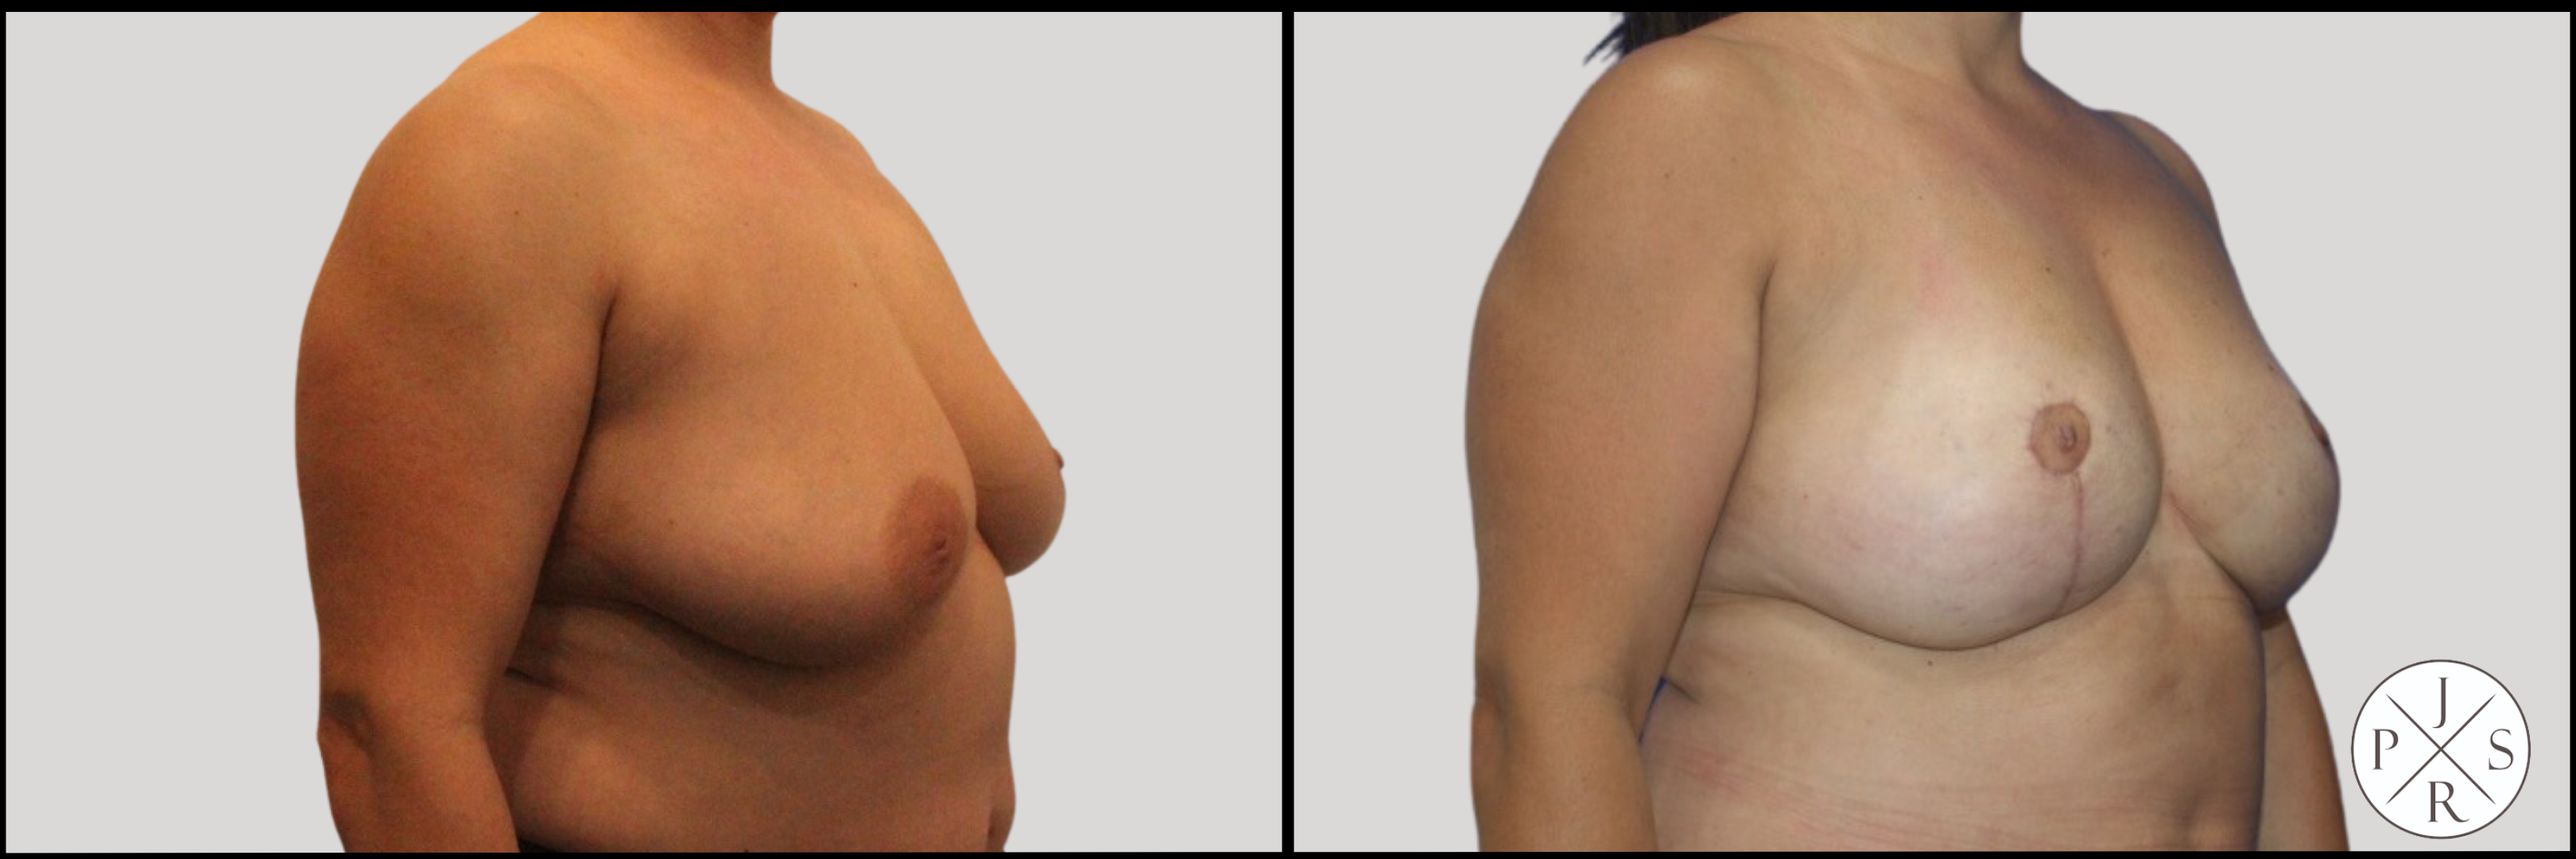 Fat Transfer Breast Augmentation Before & After Image